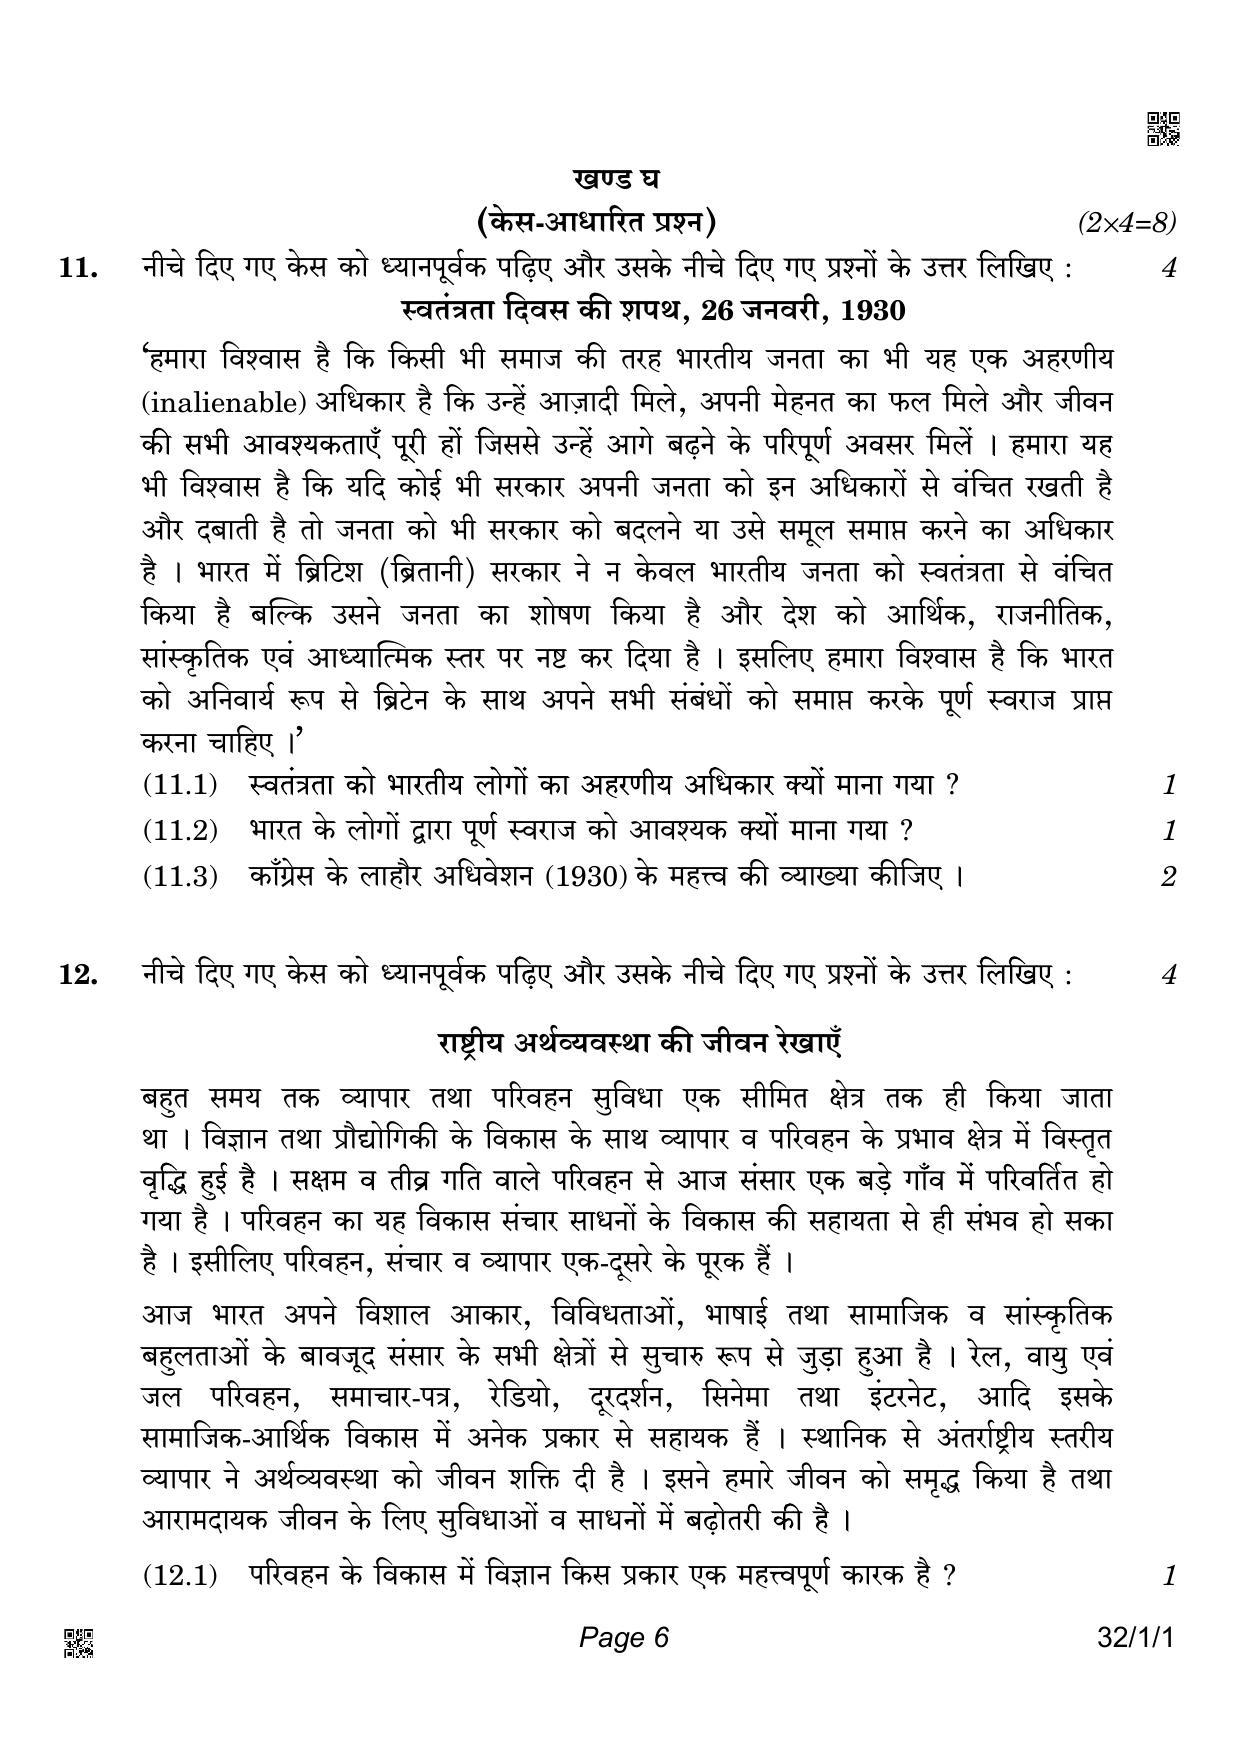 CBSE Class 10 32-1-1 Social Science 2022 Question Paper - Page 6